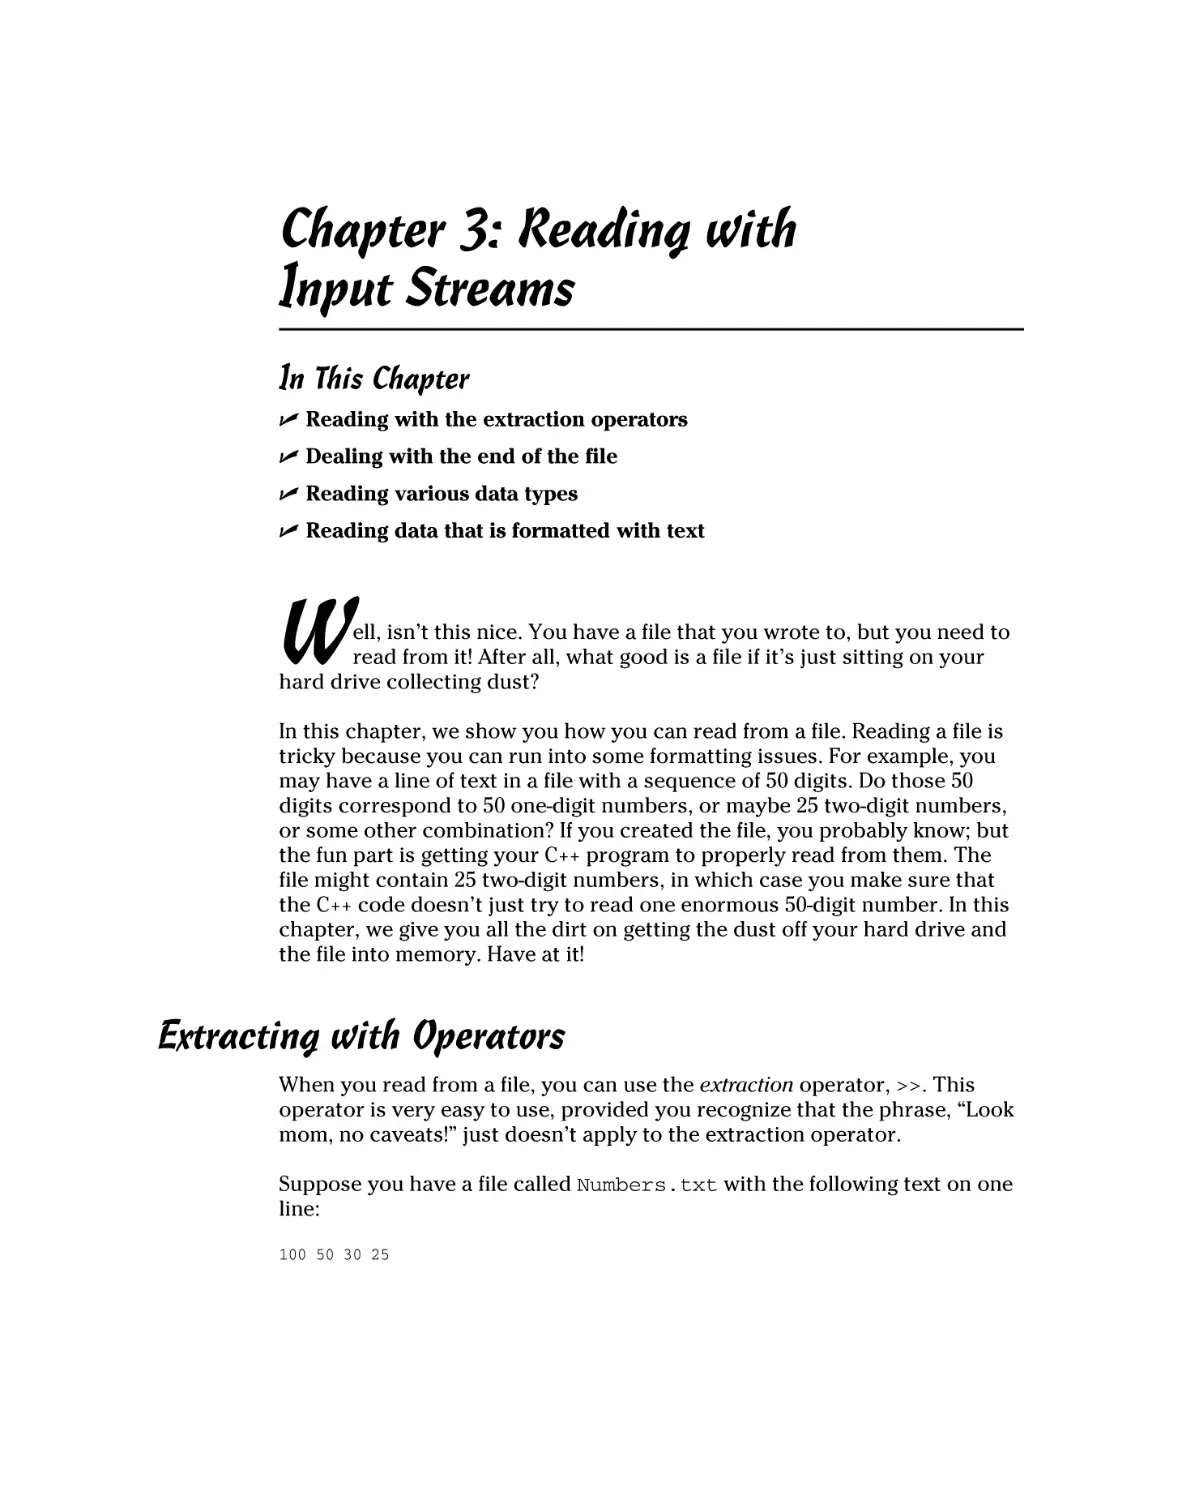 Chapter 3
Extracting with Operators